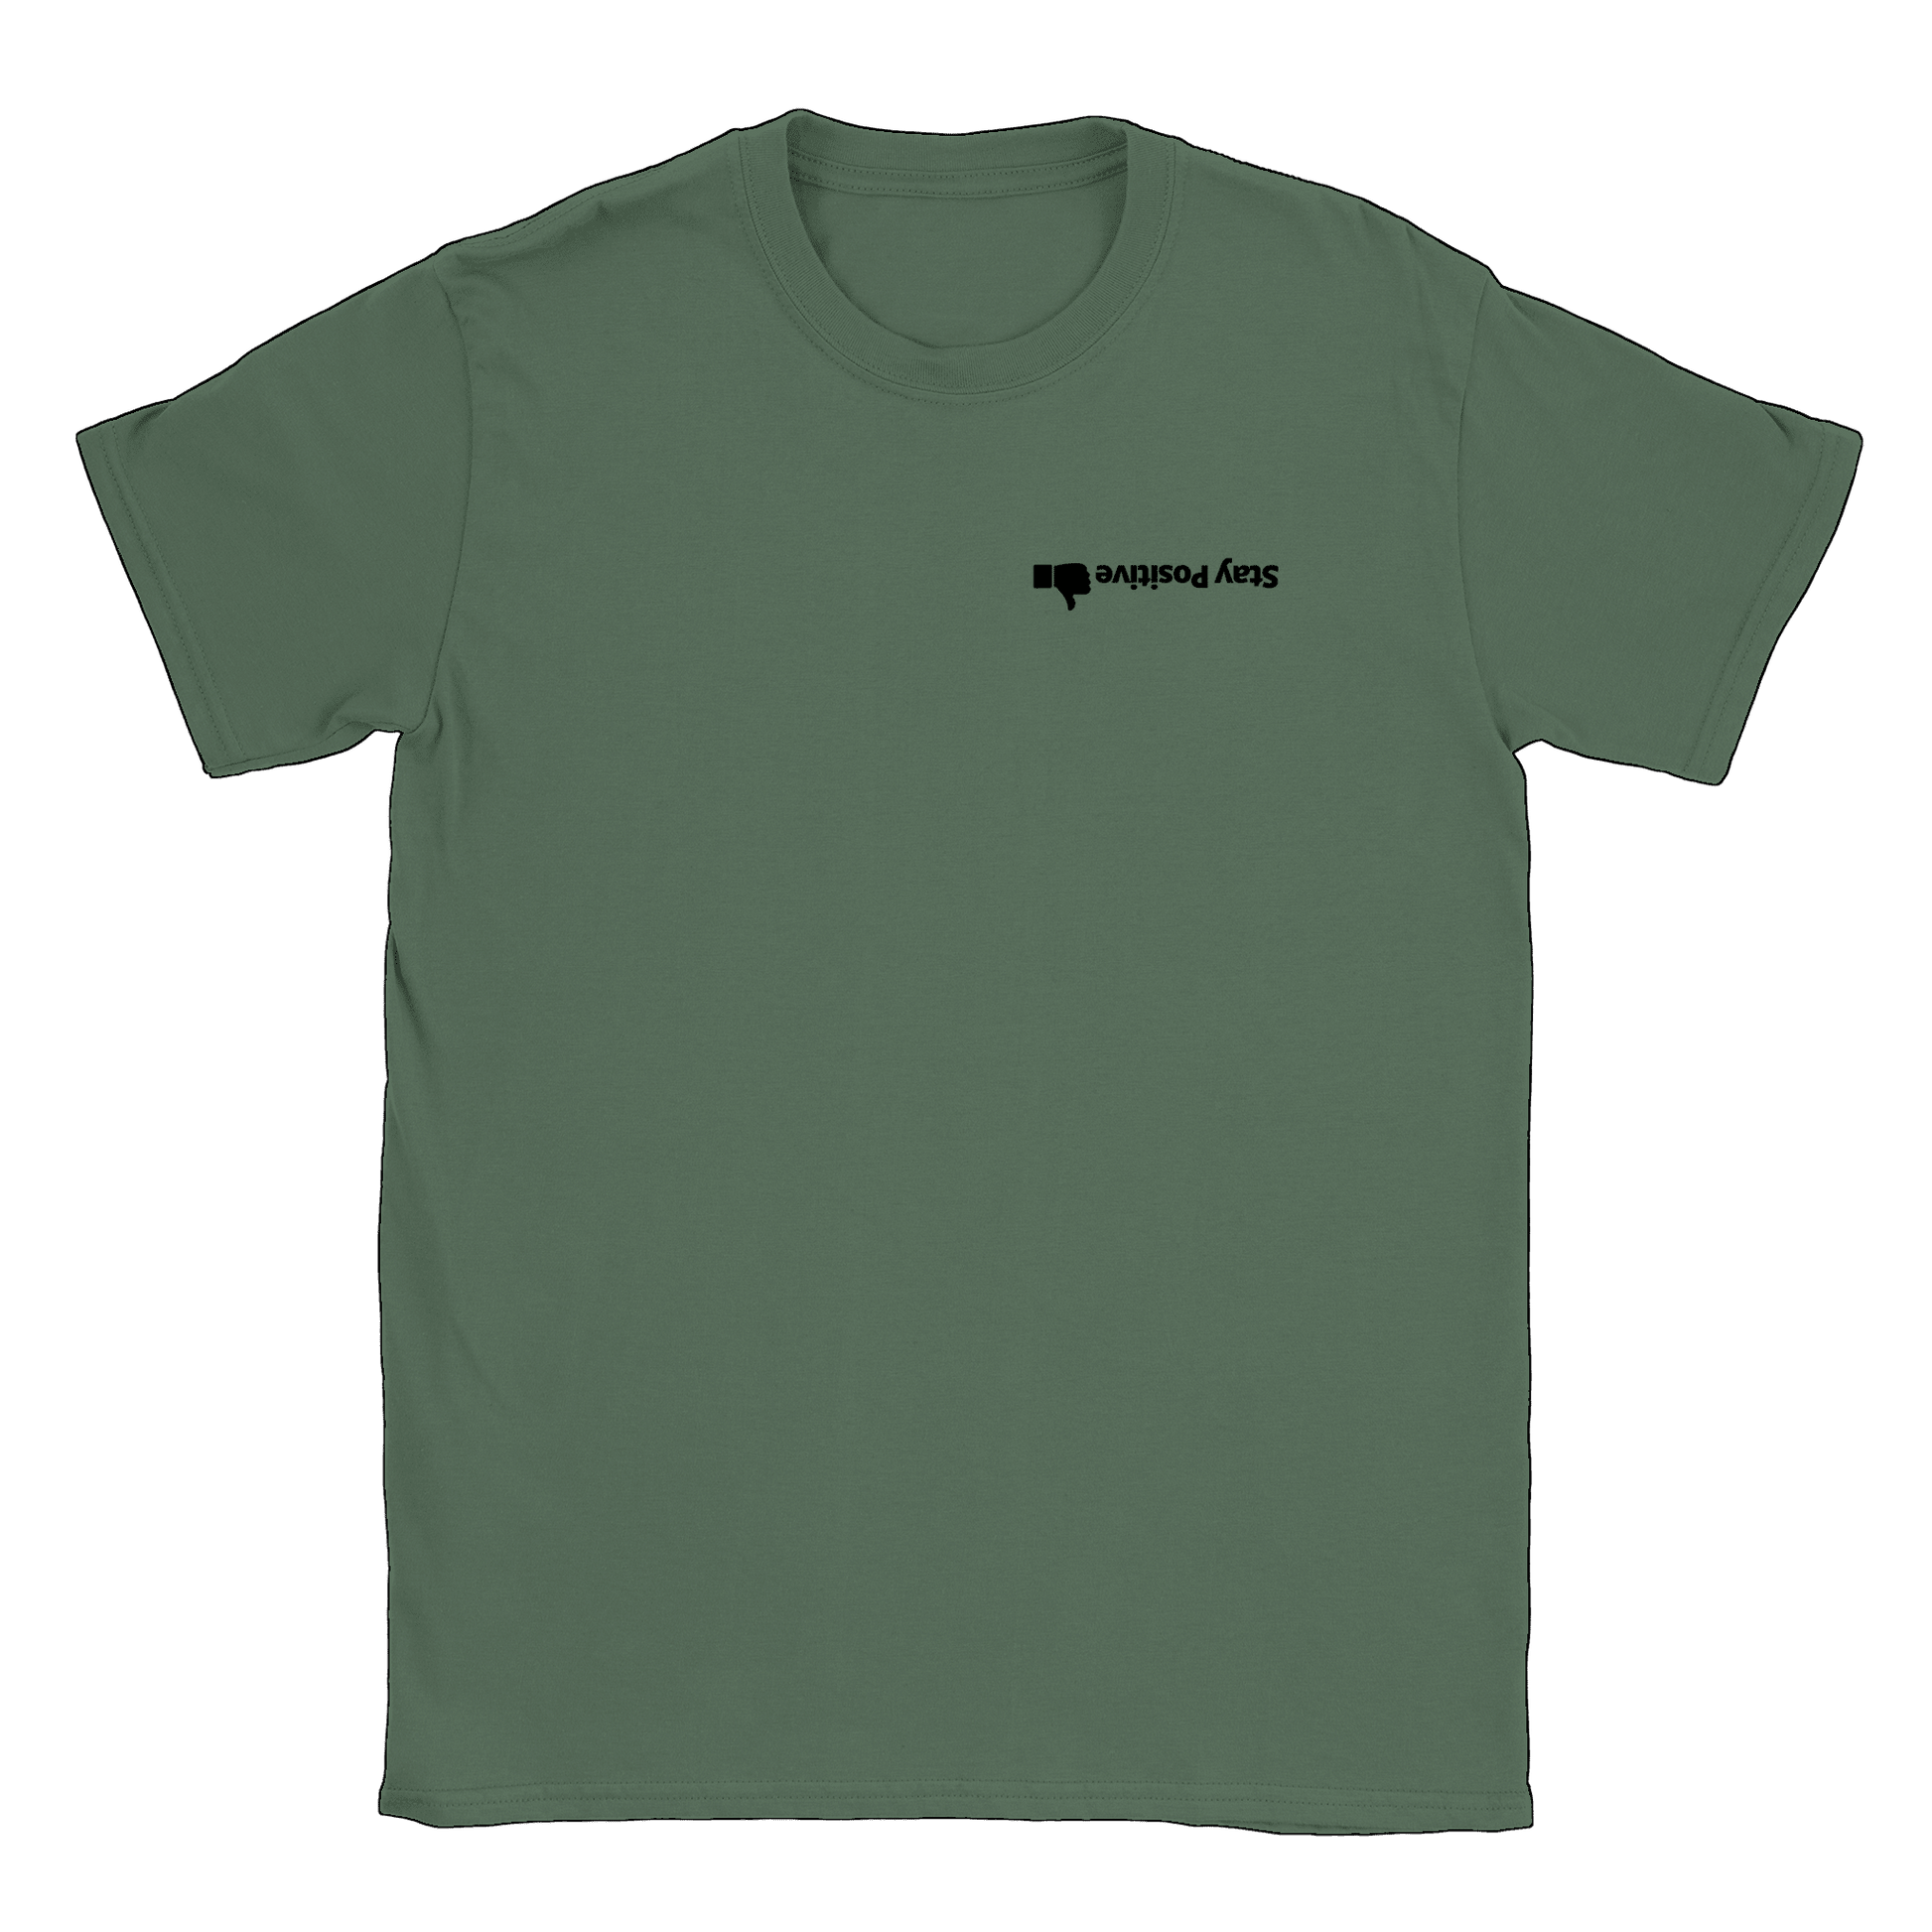 Stay Positive - T-shirt Military Green